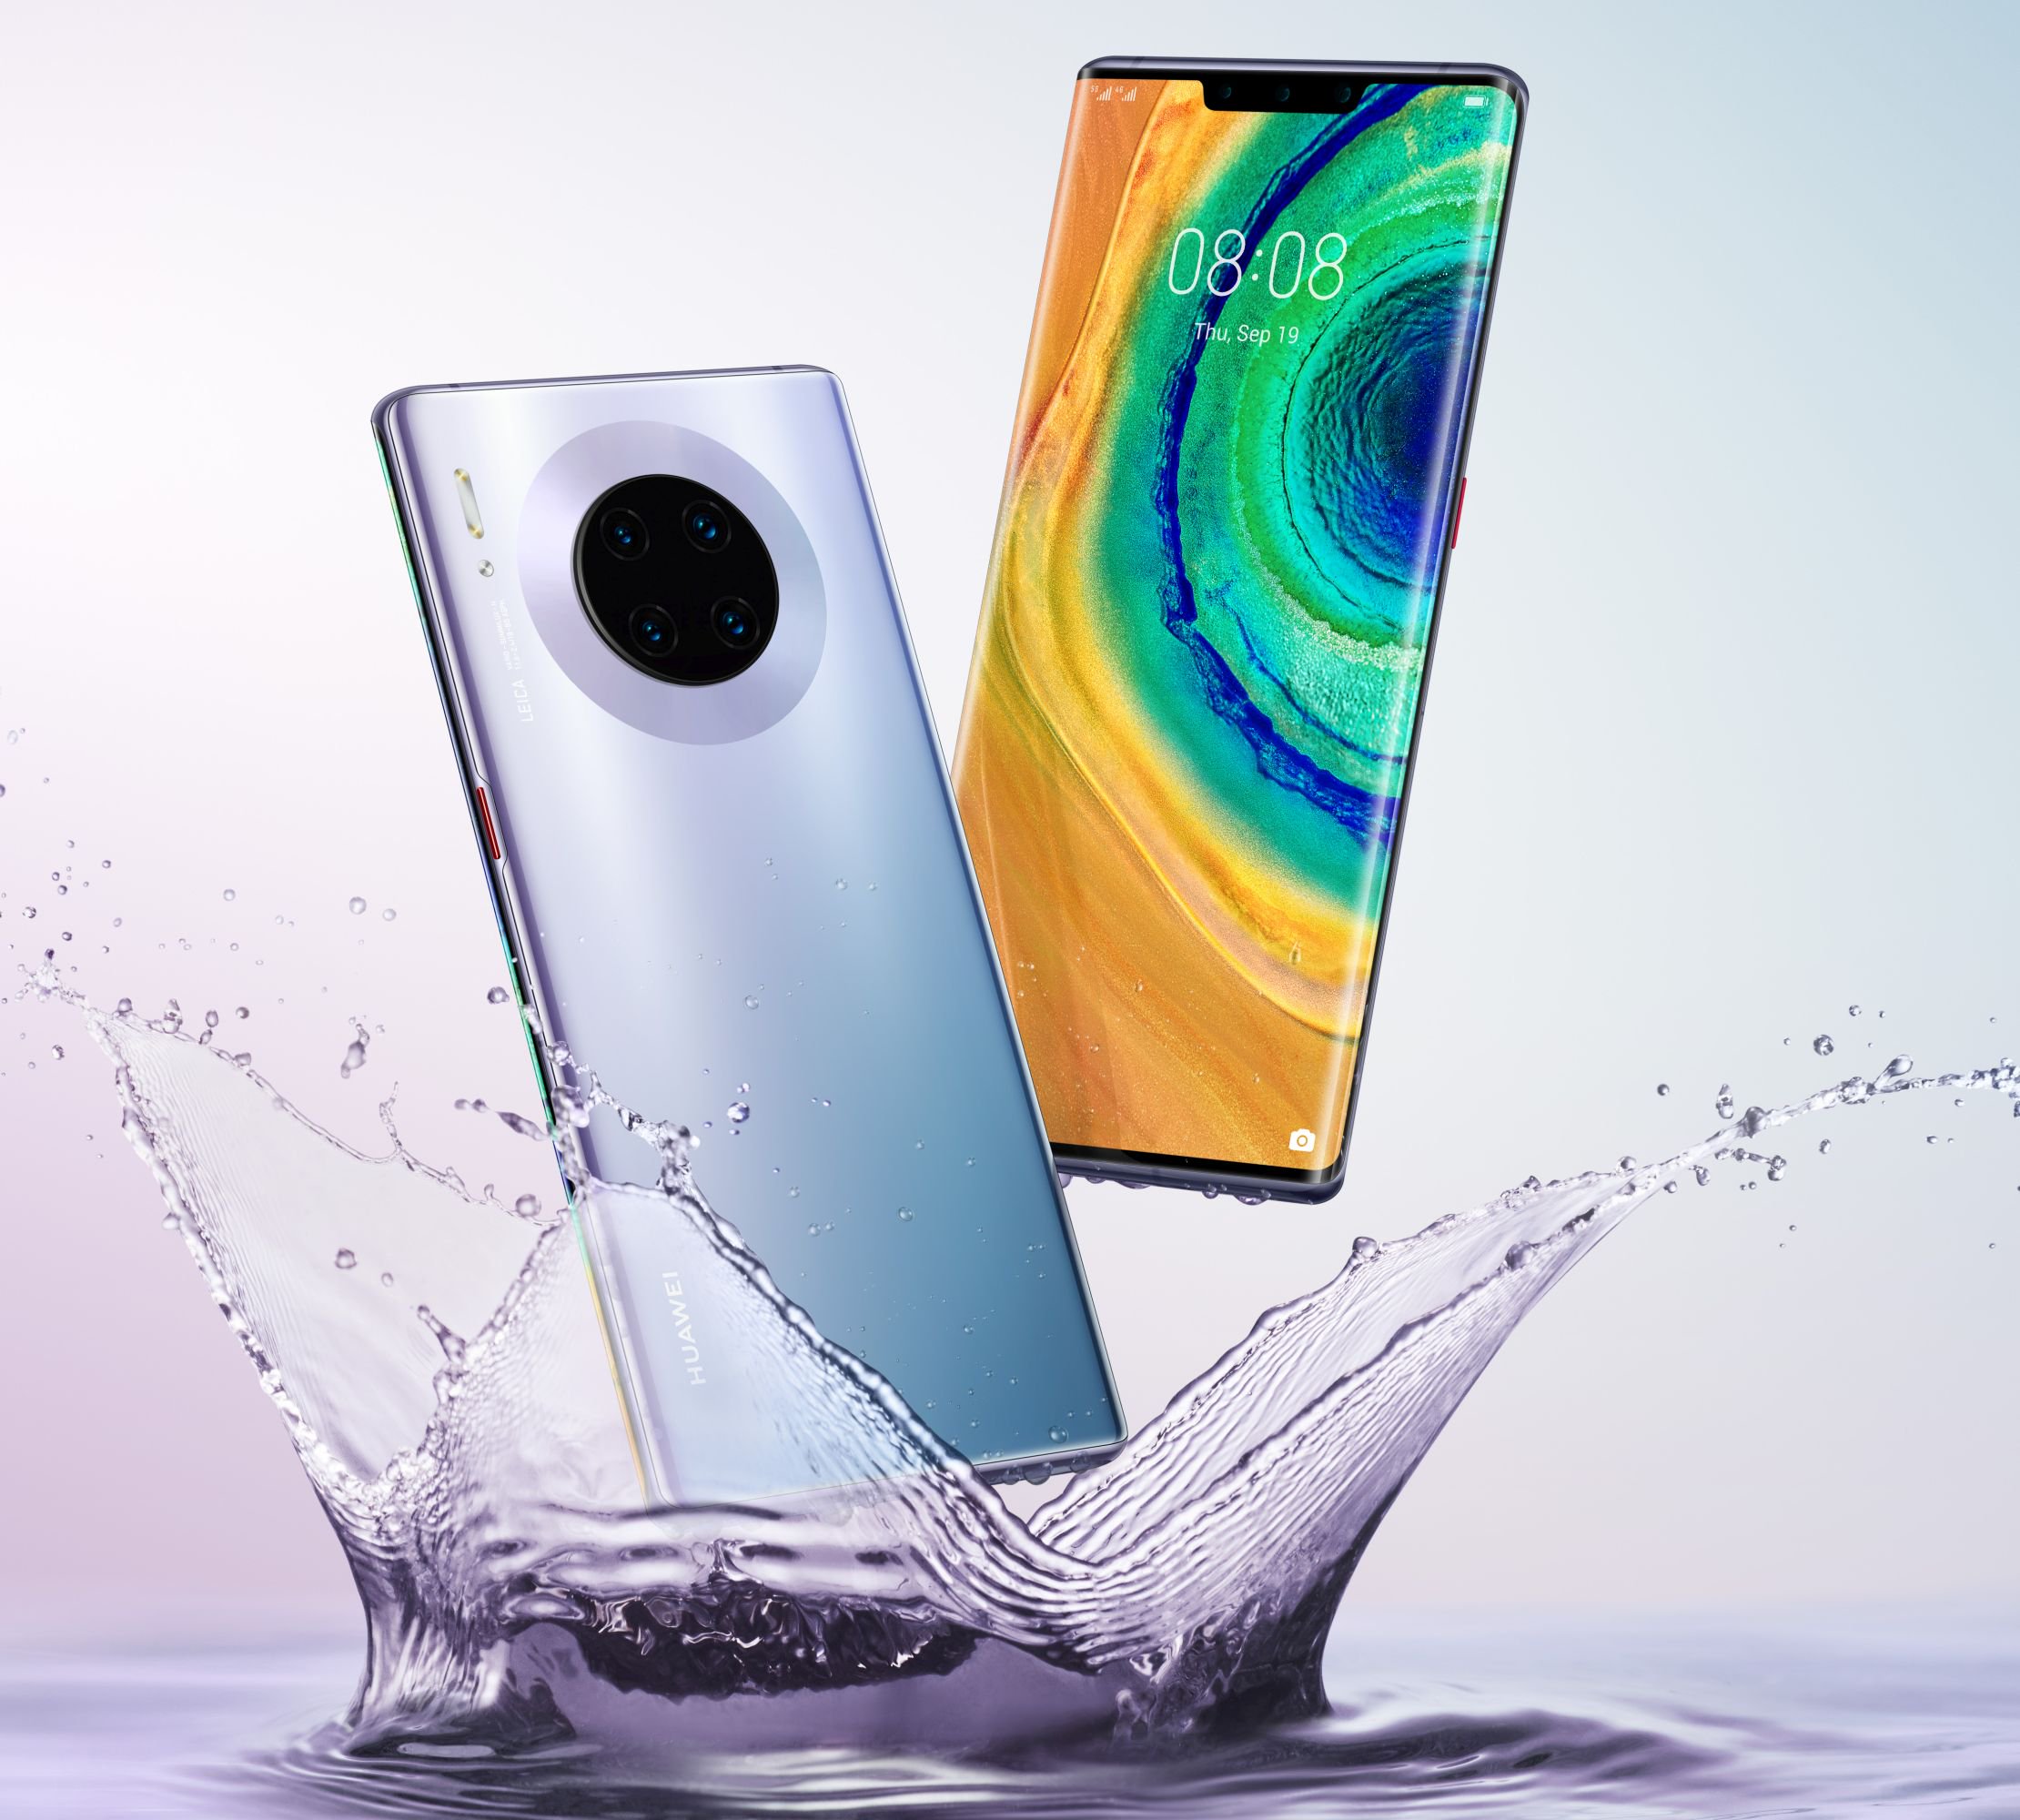 Huawei MATE 30 PRO. EXCLUSIVE, FIRST OFFICIAL Image with the Phone as it looks